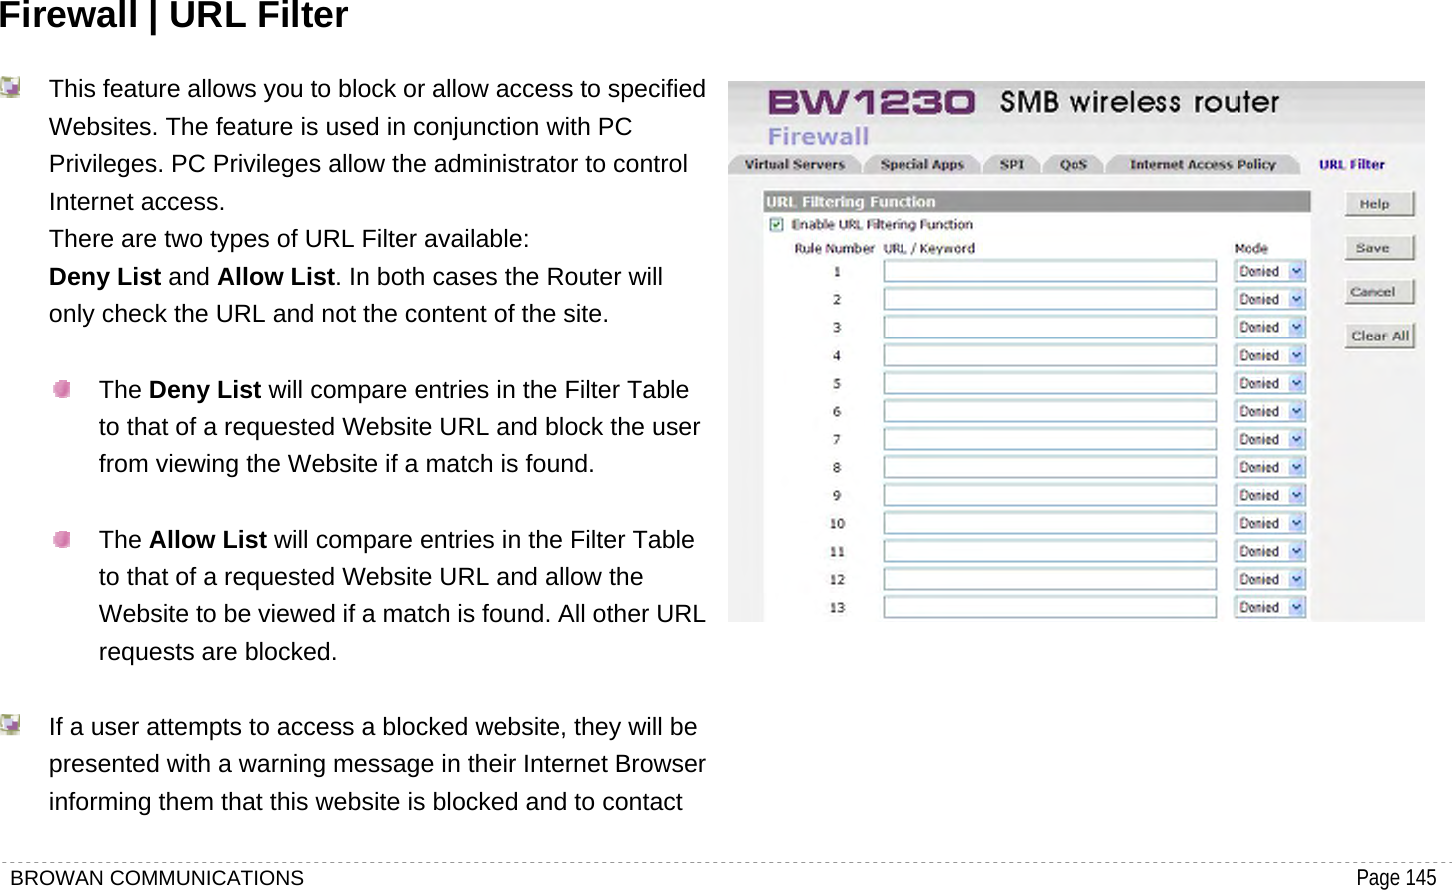 BROWAN COMMUNICATIONS                                                                                           Page 145  Firewall | URL Filter   This feature allows you to block or allow access to specified Websites. The feature is used in conjunction with PC Privileges. PC Privileges allow the administrator to control Internet access.   There are two types of URL Filter available:   Deny List and Allow List. In both cases the Router will only check the URL and not the content of the site.   The Deny List will compare entries in the Filter Table to that of a requested Website URL and block the user from viewing the Website if a match is found.   The Allow List will compare entries in the Filter Table to that of a requested Website URL and allow the Website to be viewed if a match is found. All other URL requests are blocked.    If a user attempts to access a blocked website, they will be presented with a warning message in their Internet Browser informing them that this website is blocked and to contact  